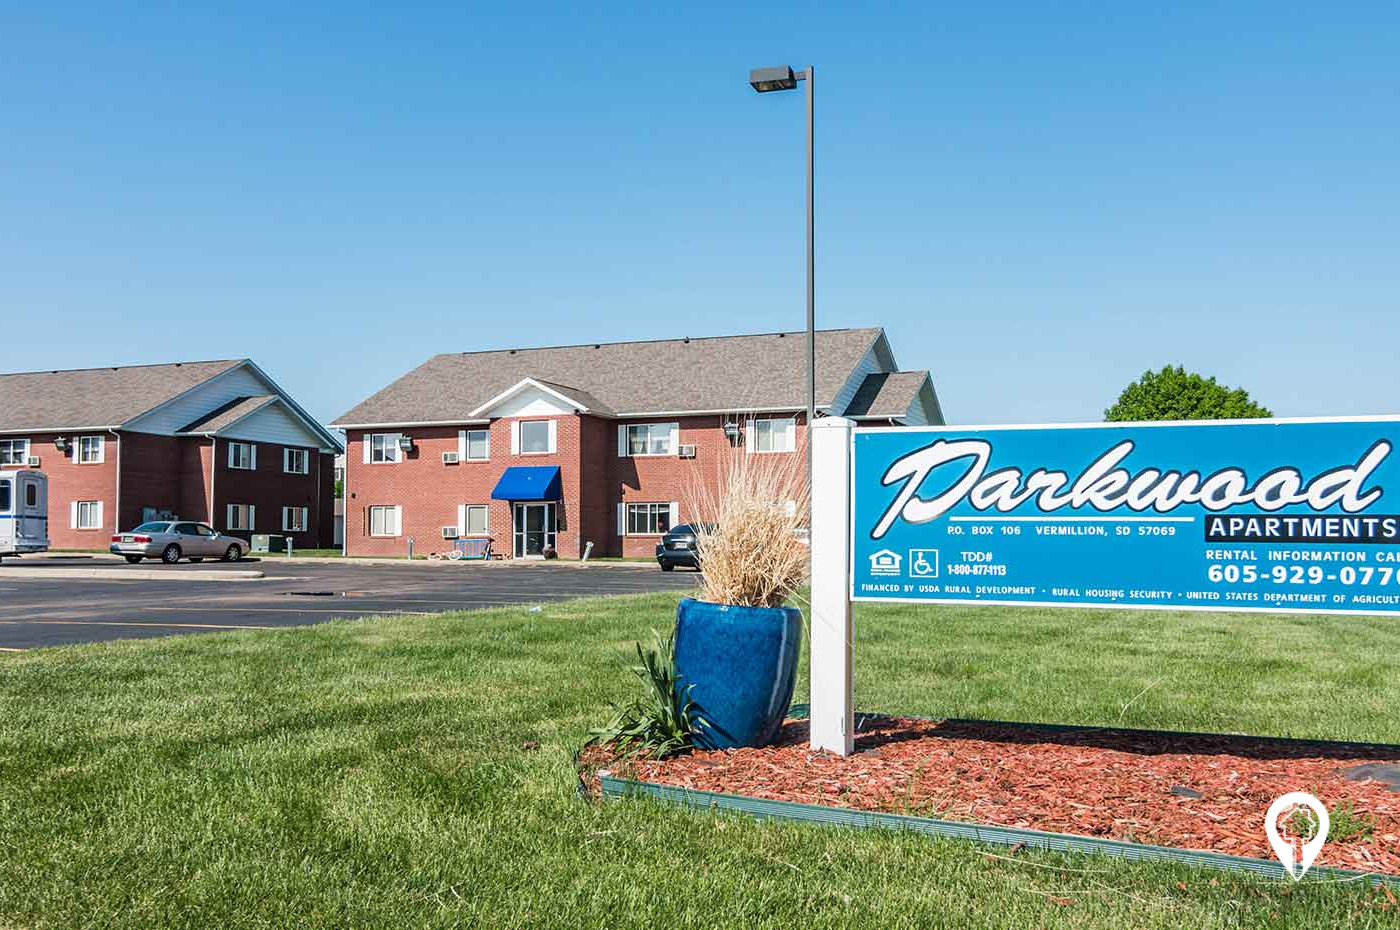 Costello Property Management - Parkwood Apartments